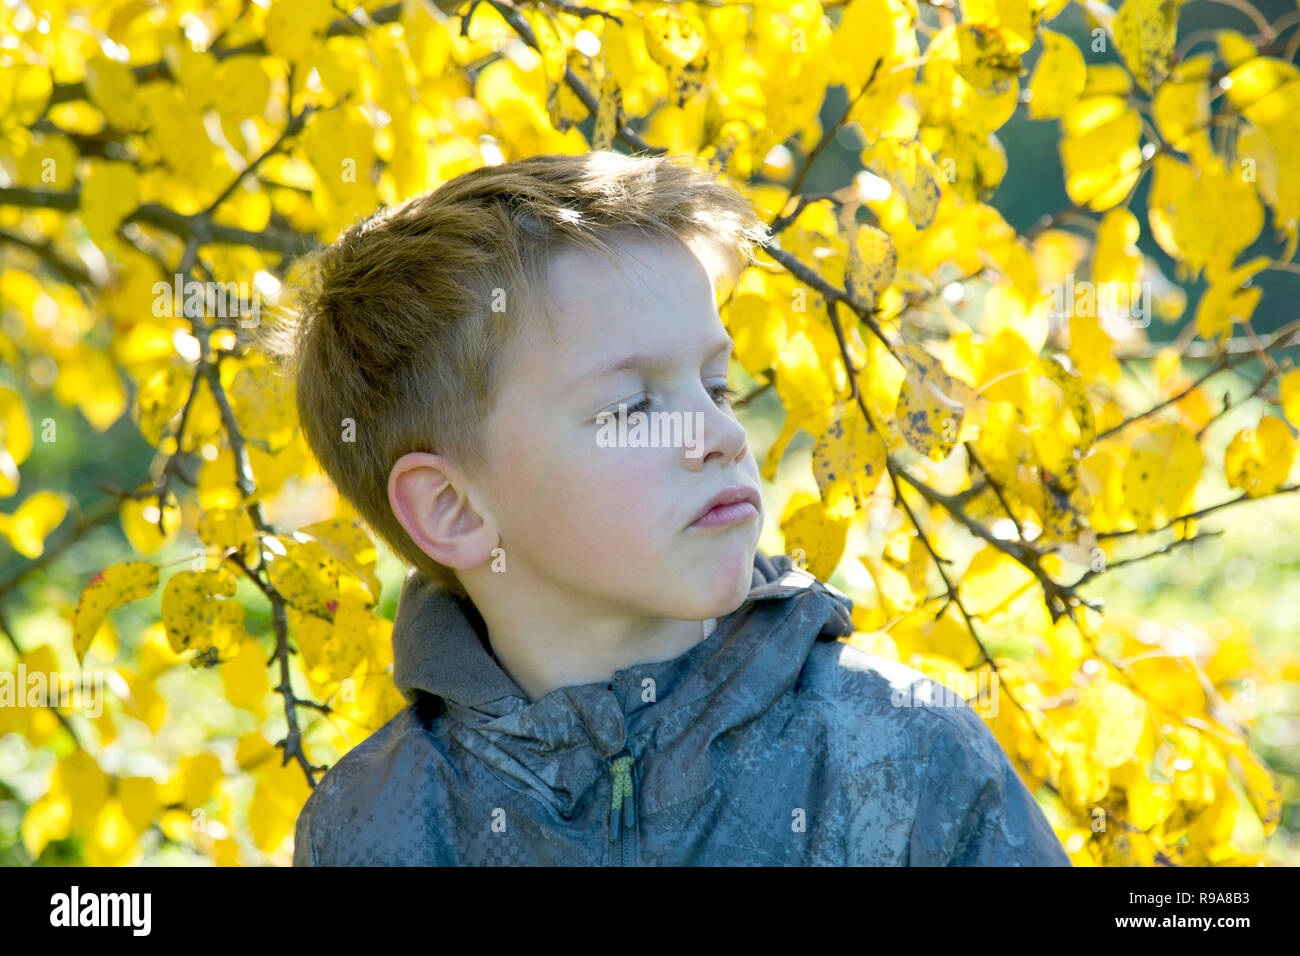 boy with an arrogant view is surrounded by yellow leaves Stock Photo